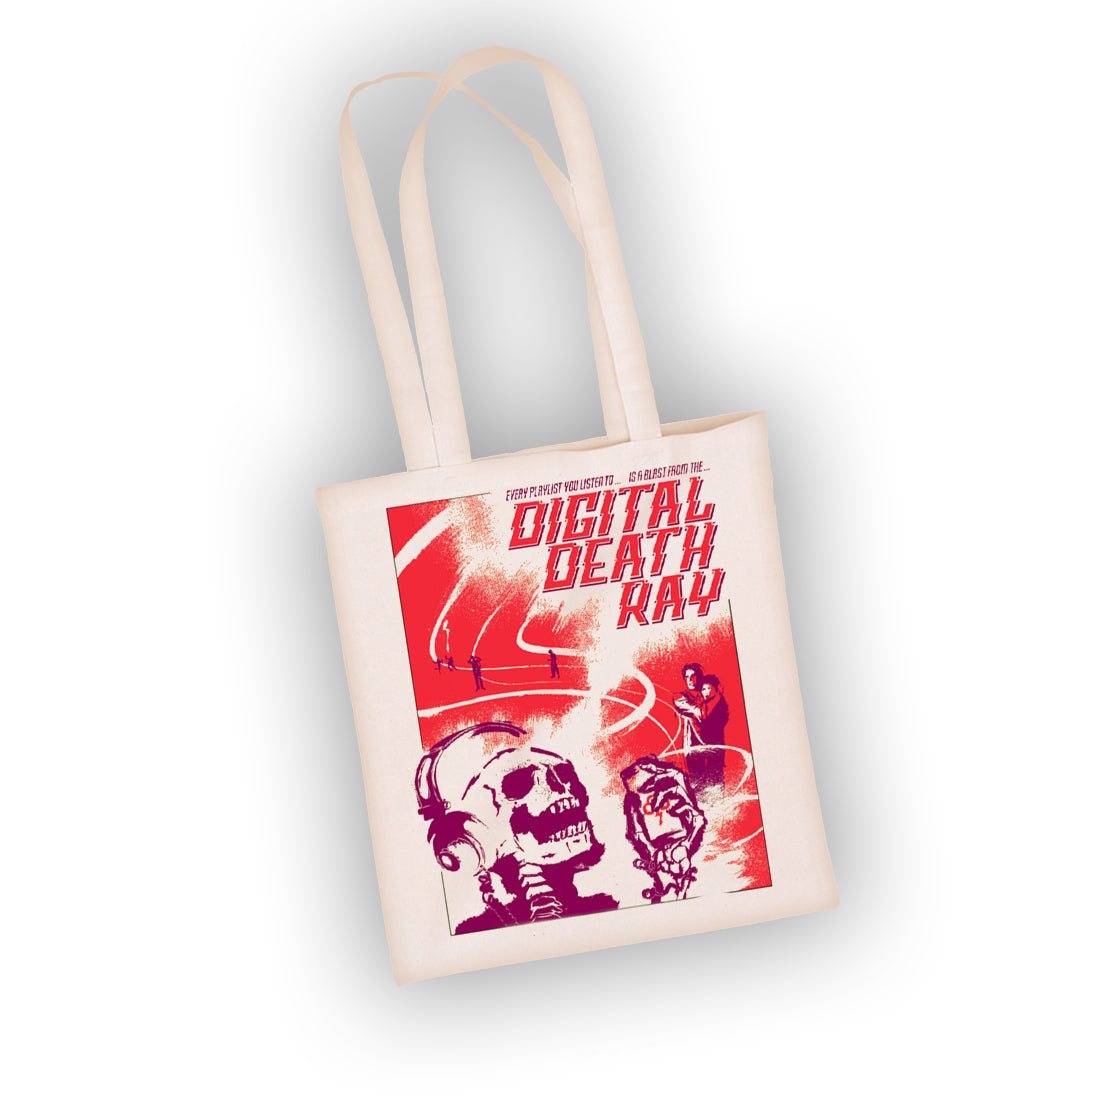 Clouds Hill "Hidden Speculations" - DIGITAL DEATH RAY (Natural) Tote Bag